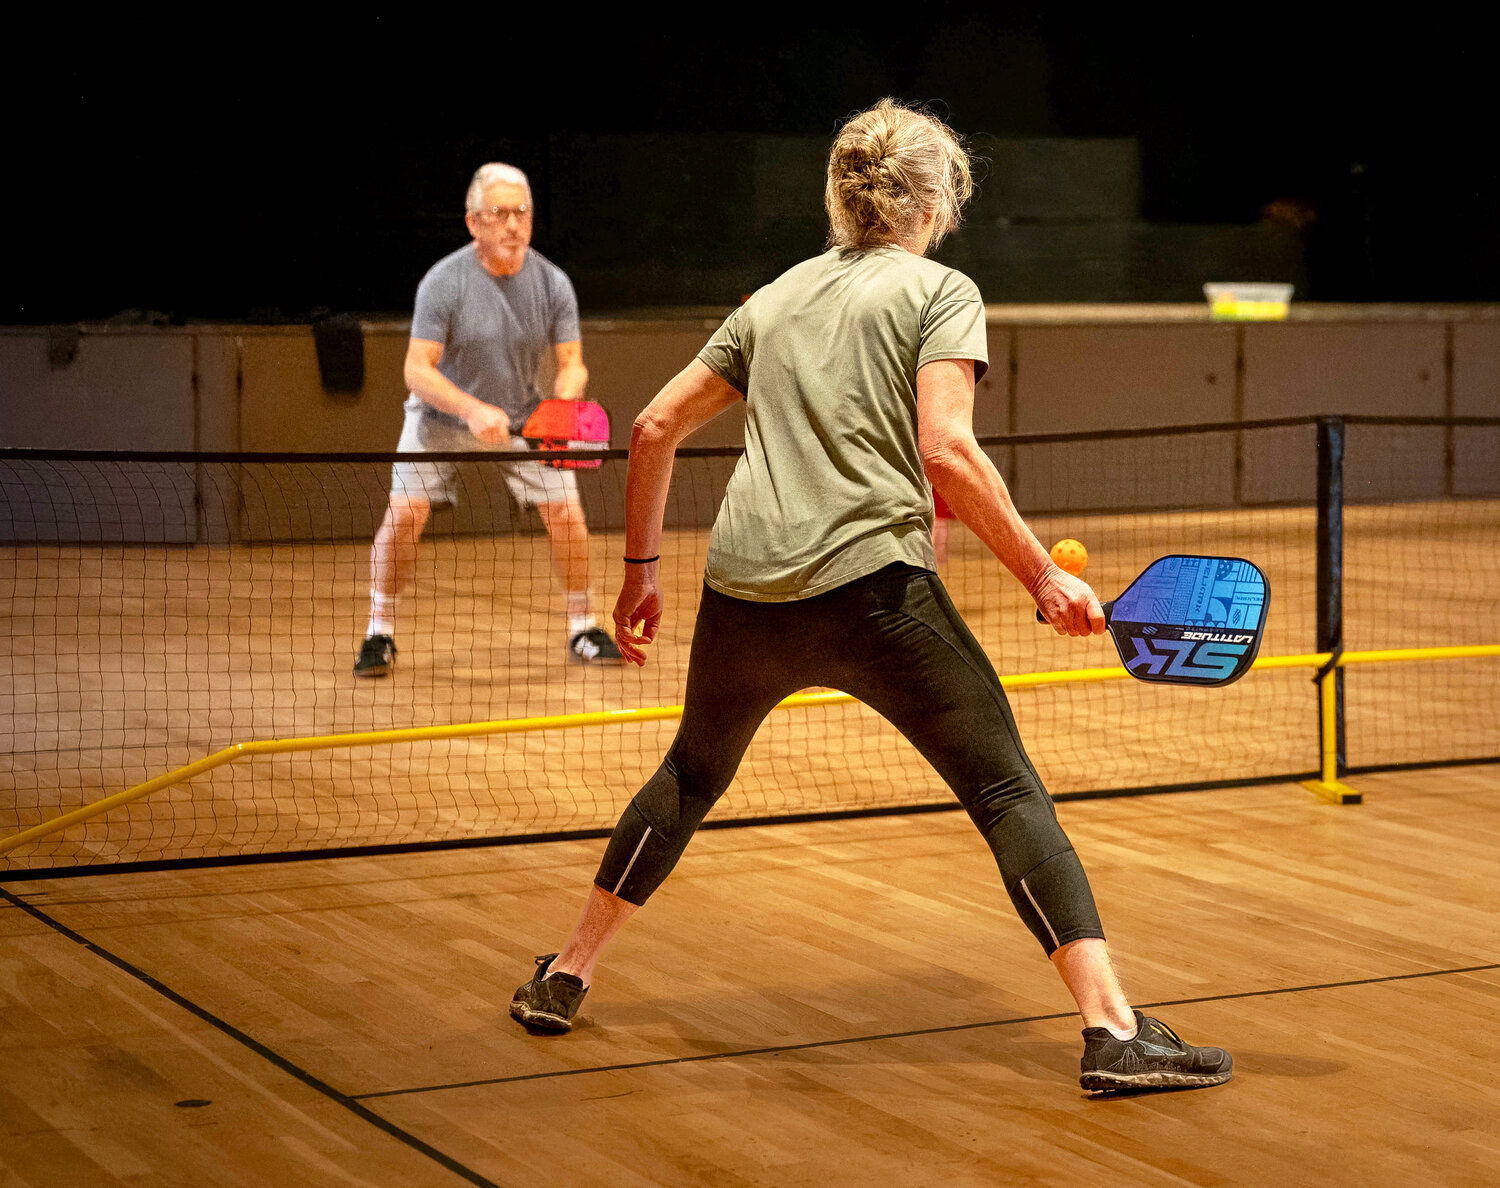 Longbranch resident Phil DiGirolamo and his wife Michele Gorman enjoy all the pickleball action available close to home.